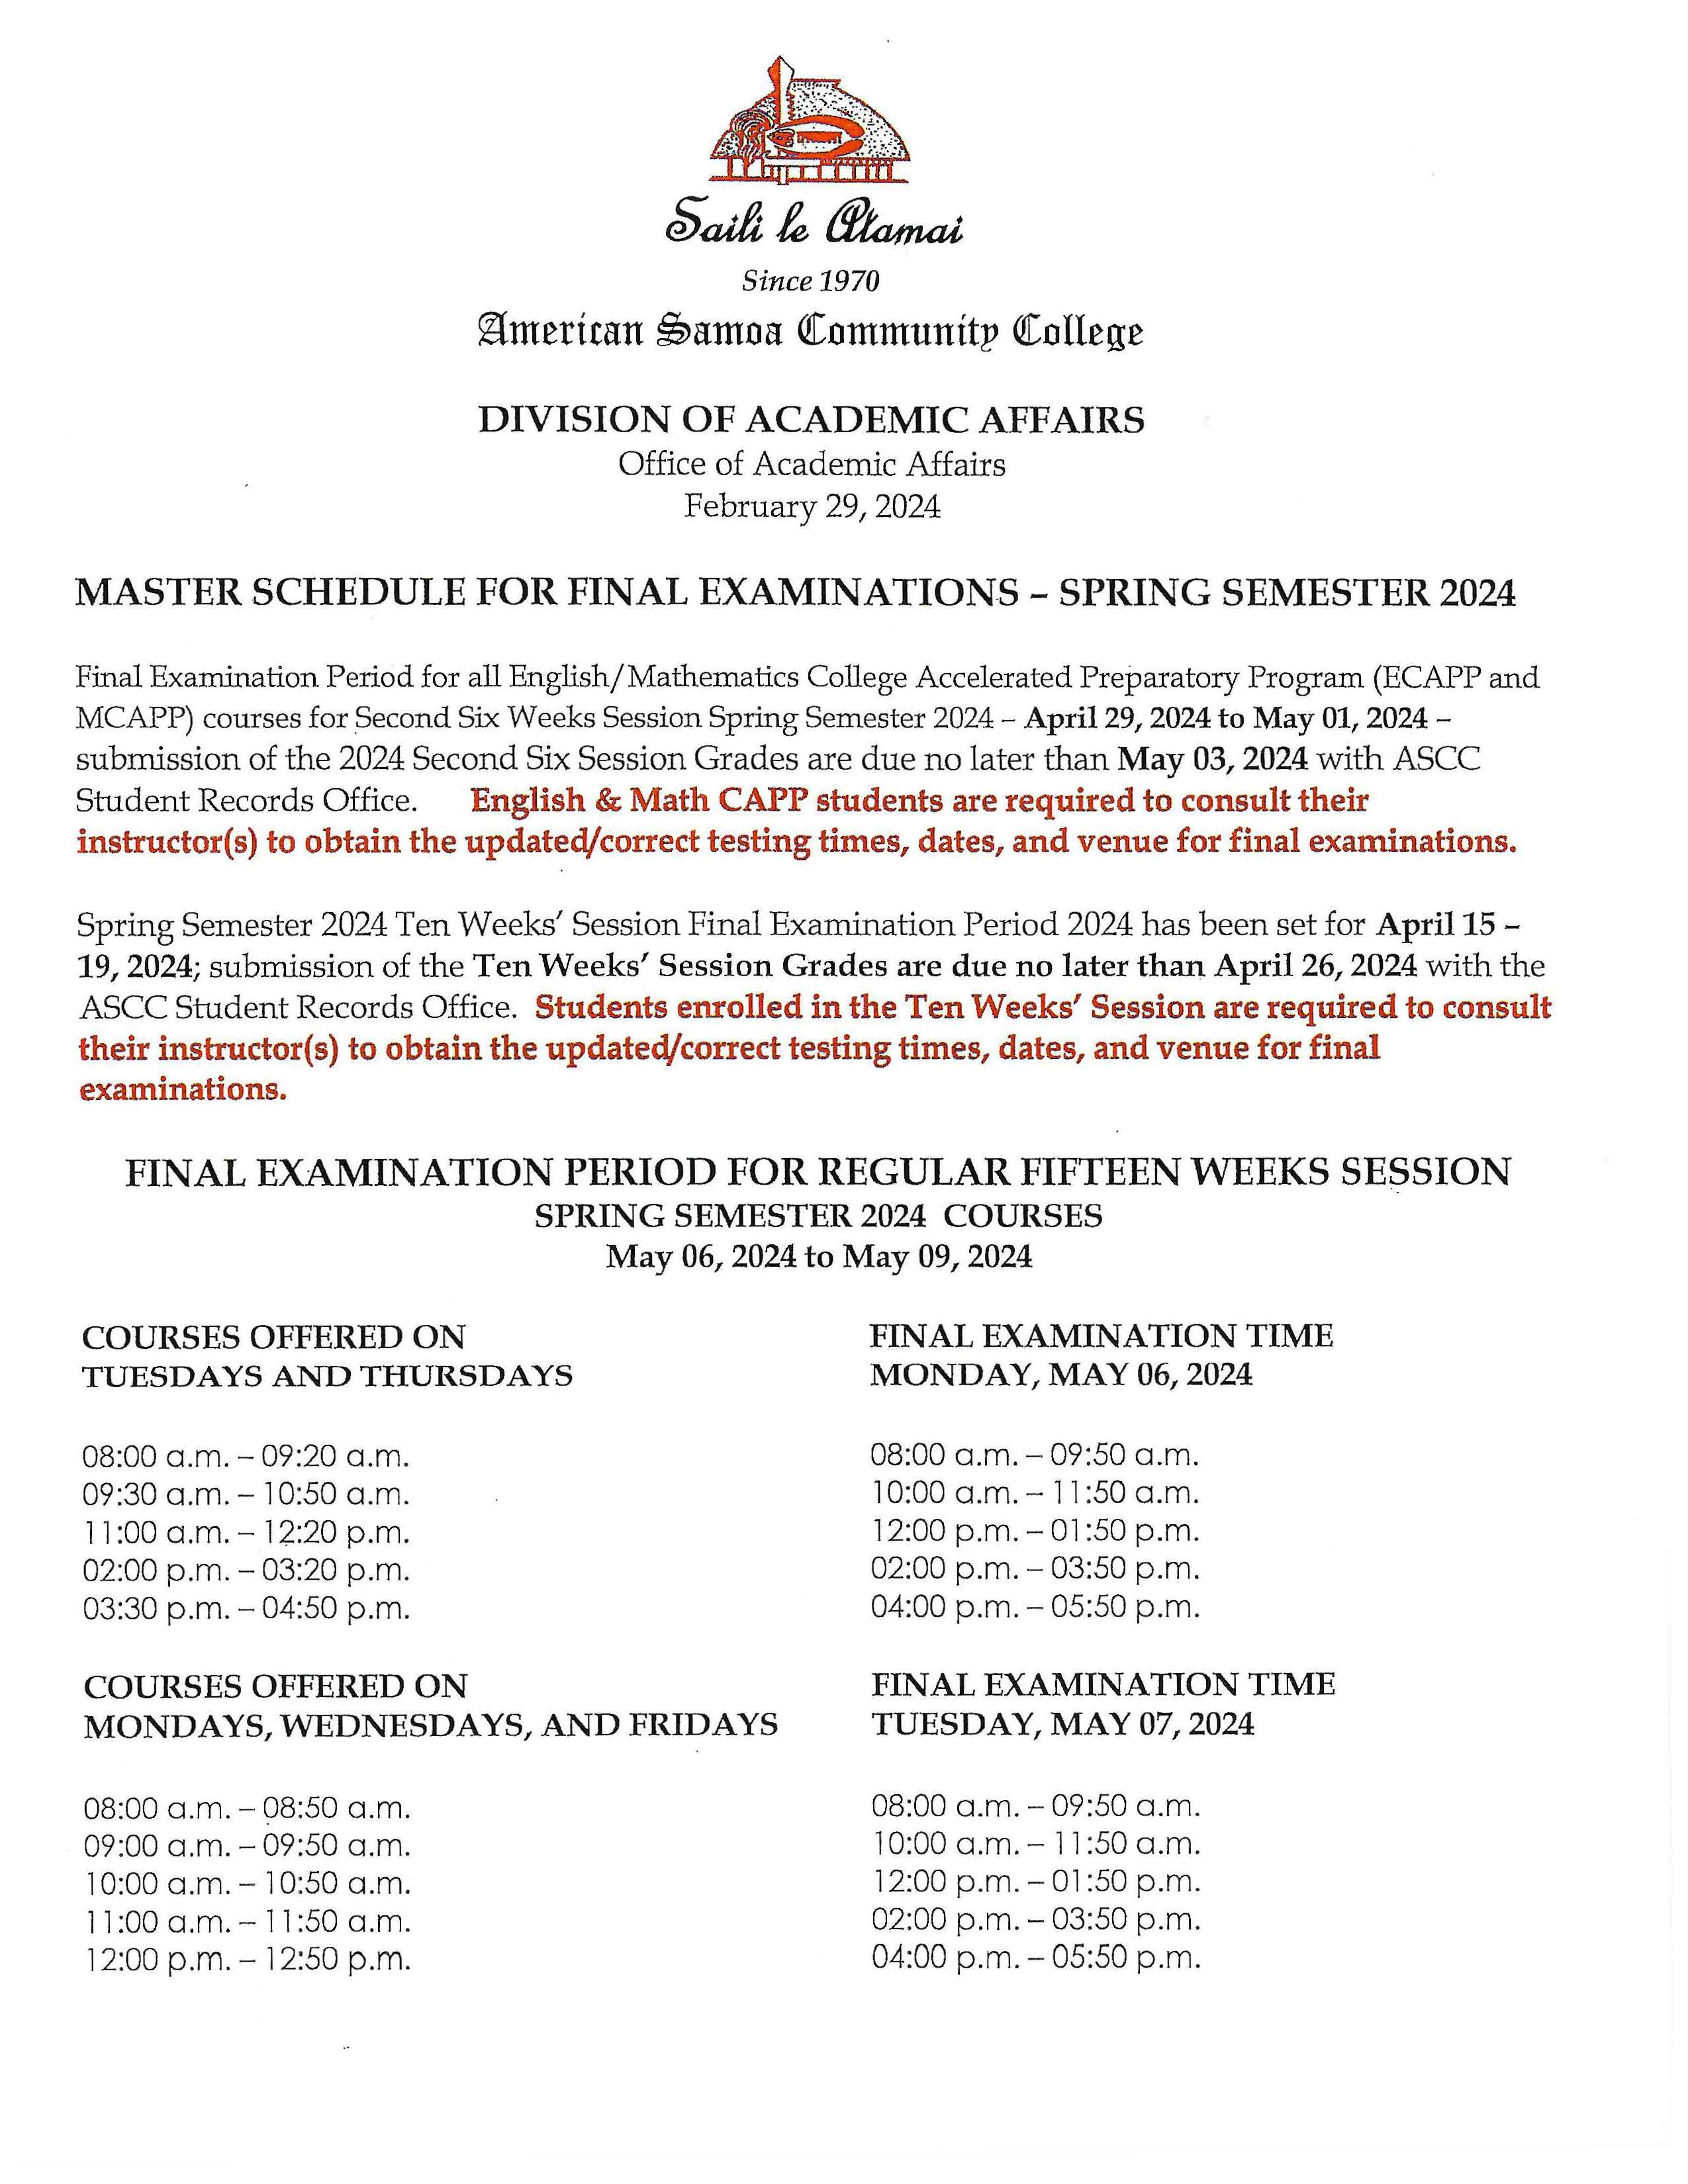 spring 2024 master schedule for final examination page 1